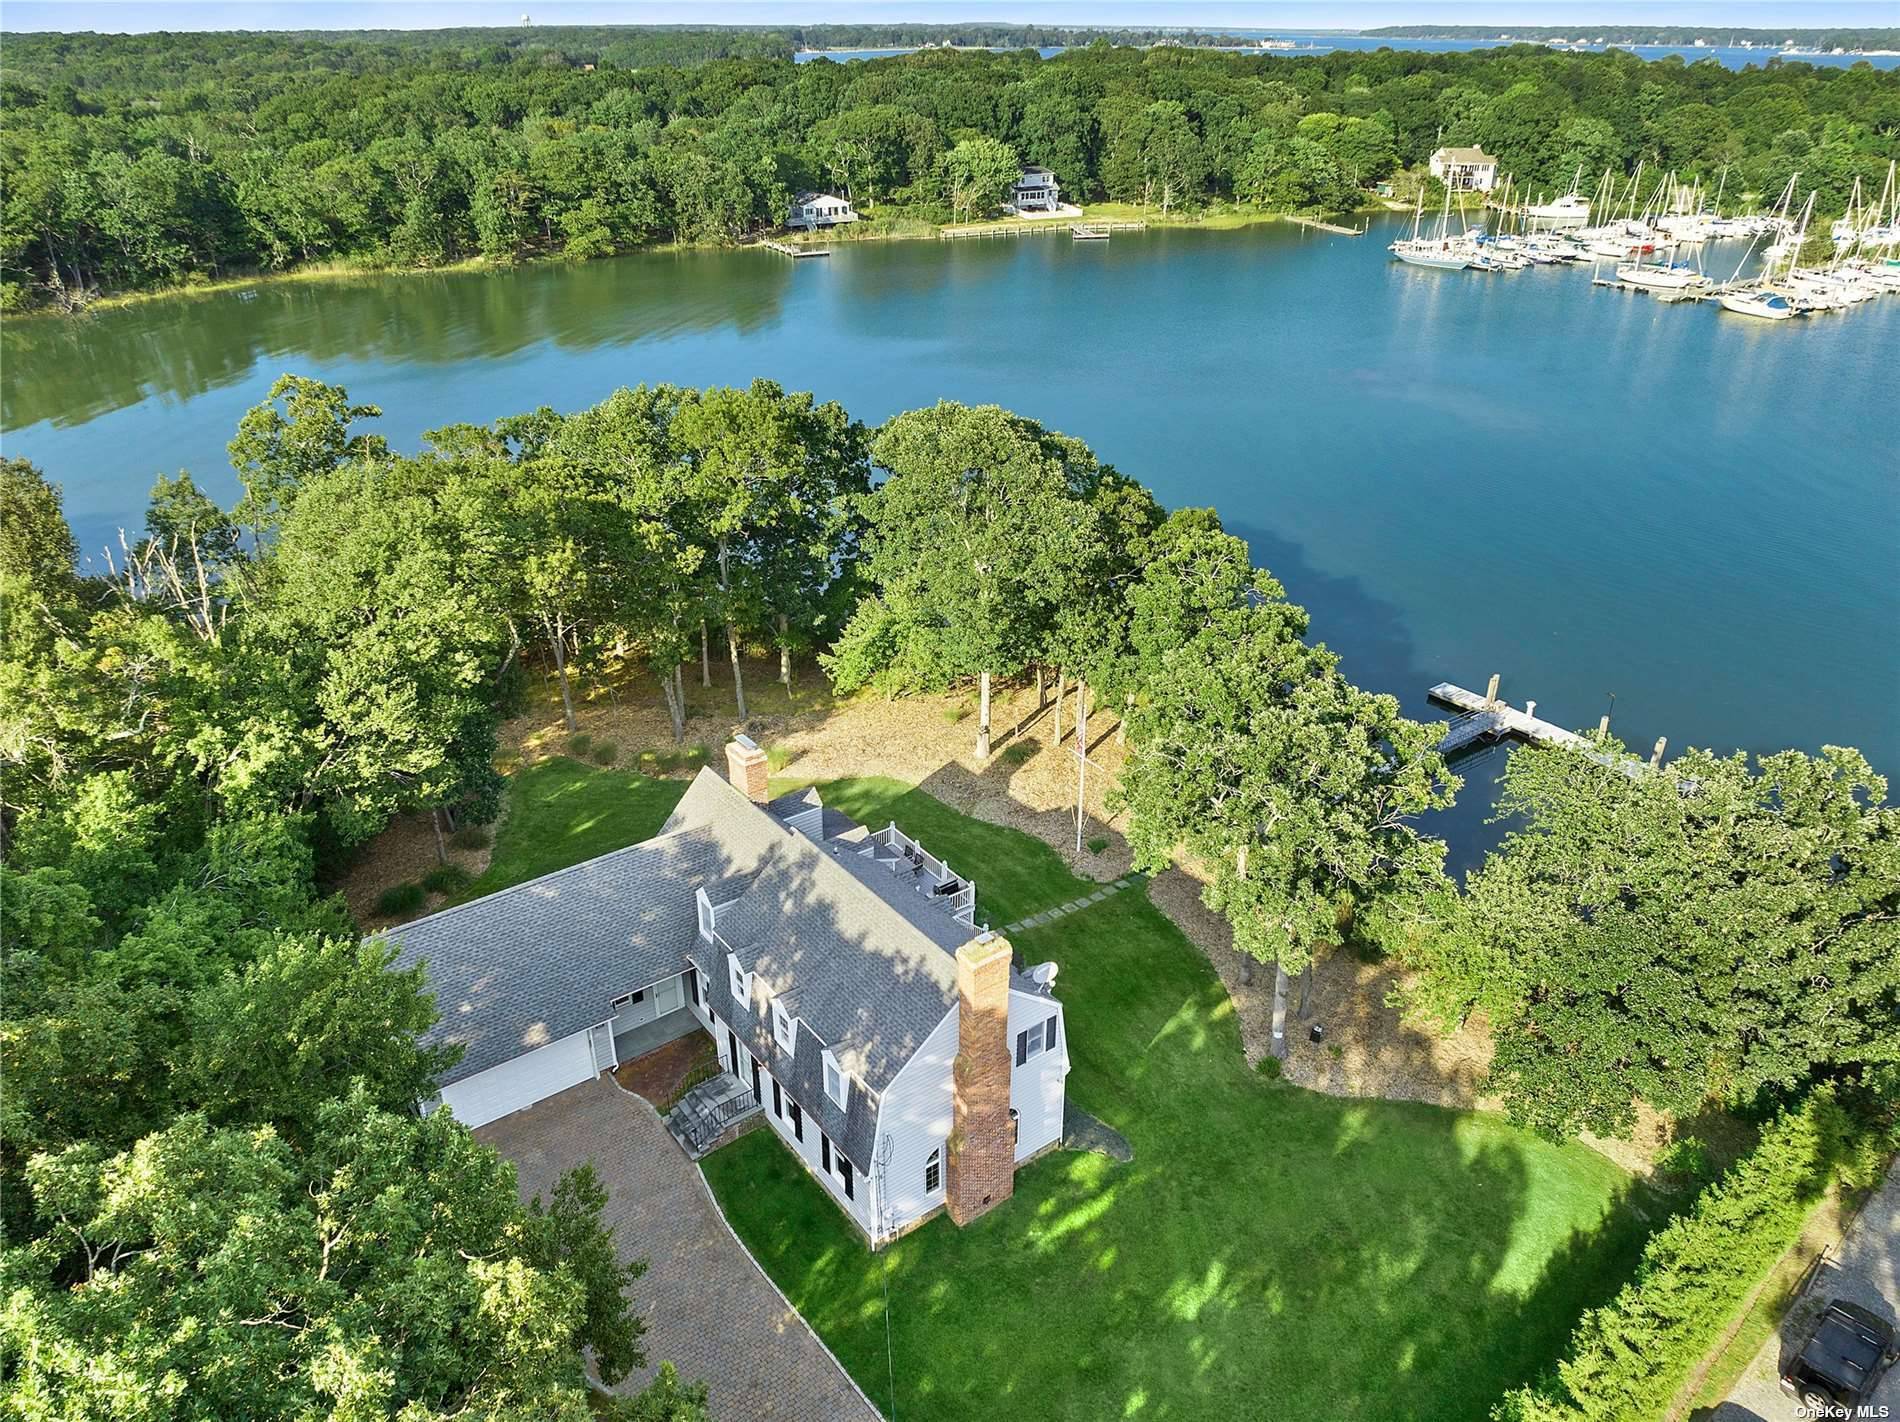 Deep Water Oasis Tucked Away In A Protected Cove Don't Miss This 4 Bedroom, 3 Bath, Modern Sun Drenched Colonial With Plenty Of Deep Water Dockage For Several Boats, 270 ...